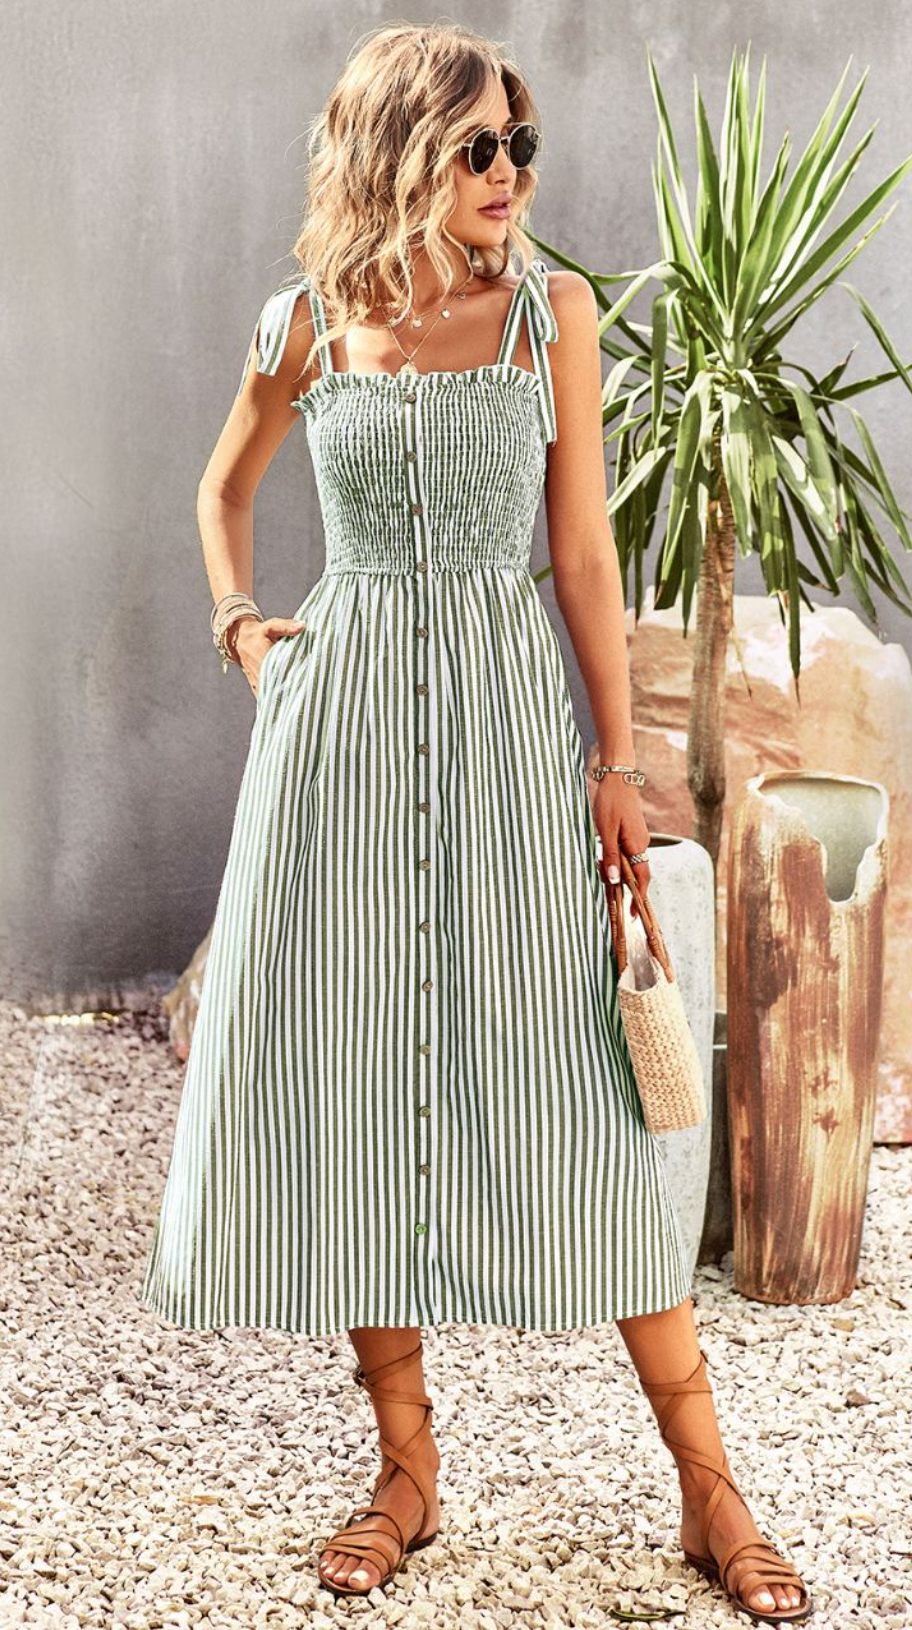 This Melody Midi dress is the epitome of timeless sophistication. With its intricate button details, contemporary tie-up accents, and elegant midi length, this dress is perfect for an evening of luxury and style. With its high quality craftsmanship and exclusive design, this dress will have you effortlessly making an unforgettable statement.